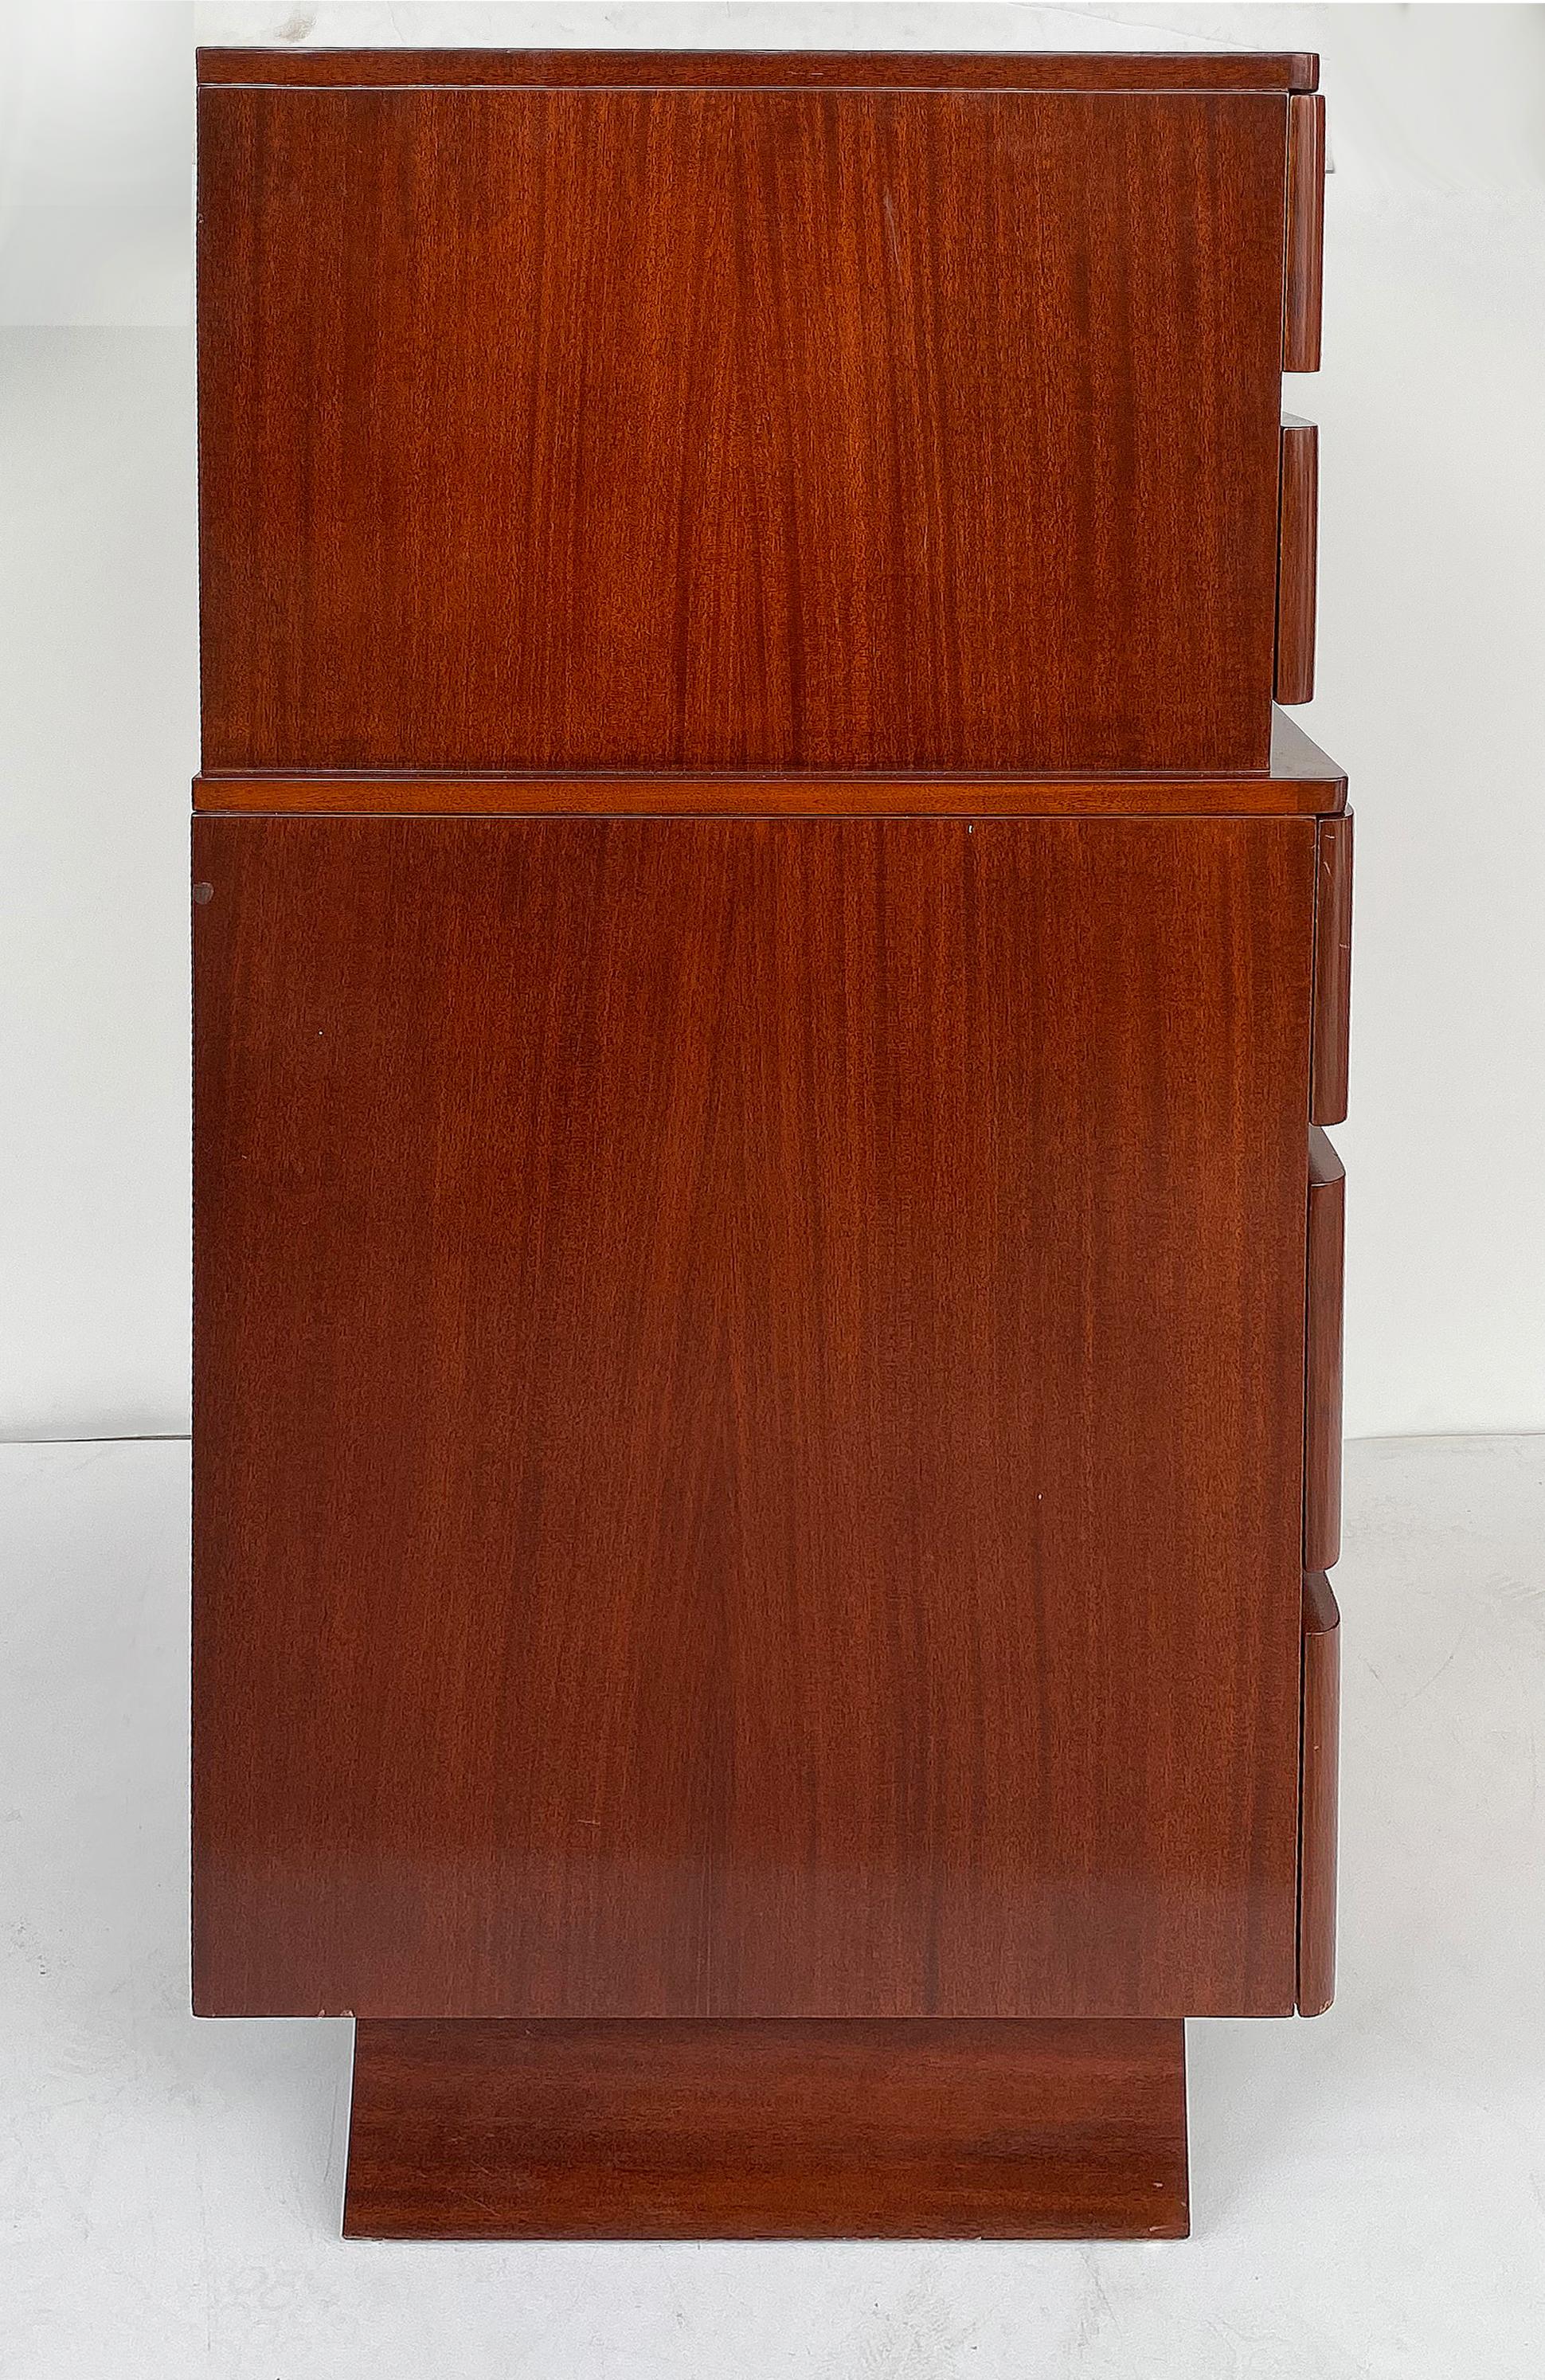 Offered for sale is an American Mid-Century Modern tall chest of drawers manufactured by RWAY Furniture Co. This stylish chest is mahogany and bird's eye maple. The chest with its five drawers sits on splayed tapering feet and has the RWAY in the